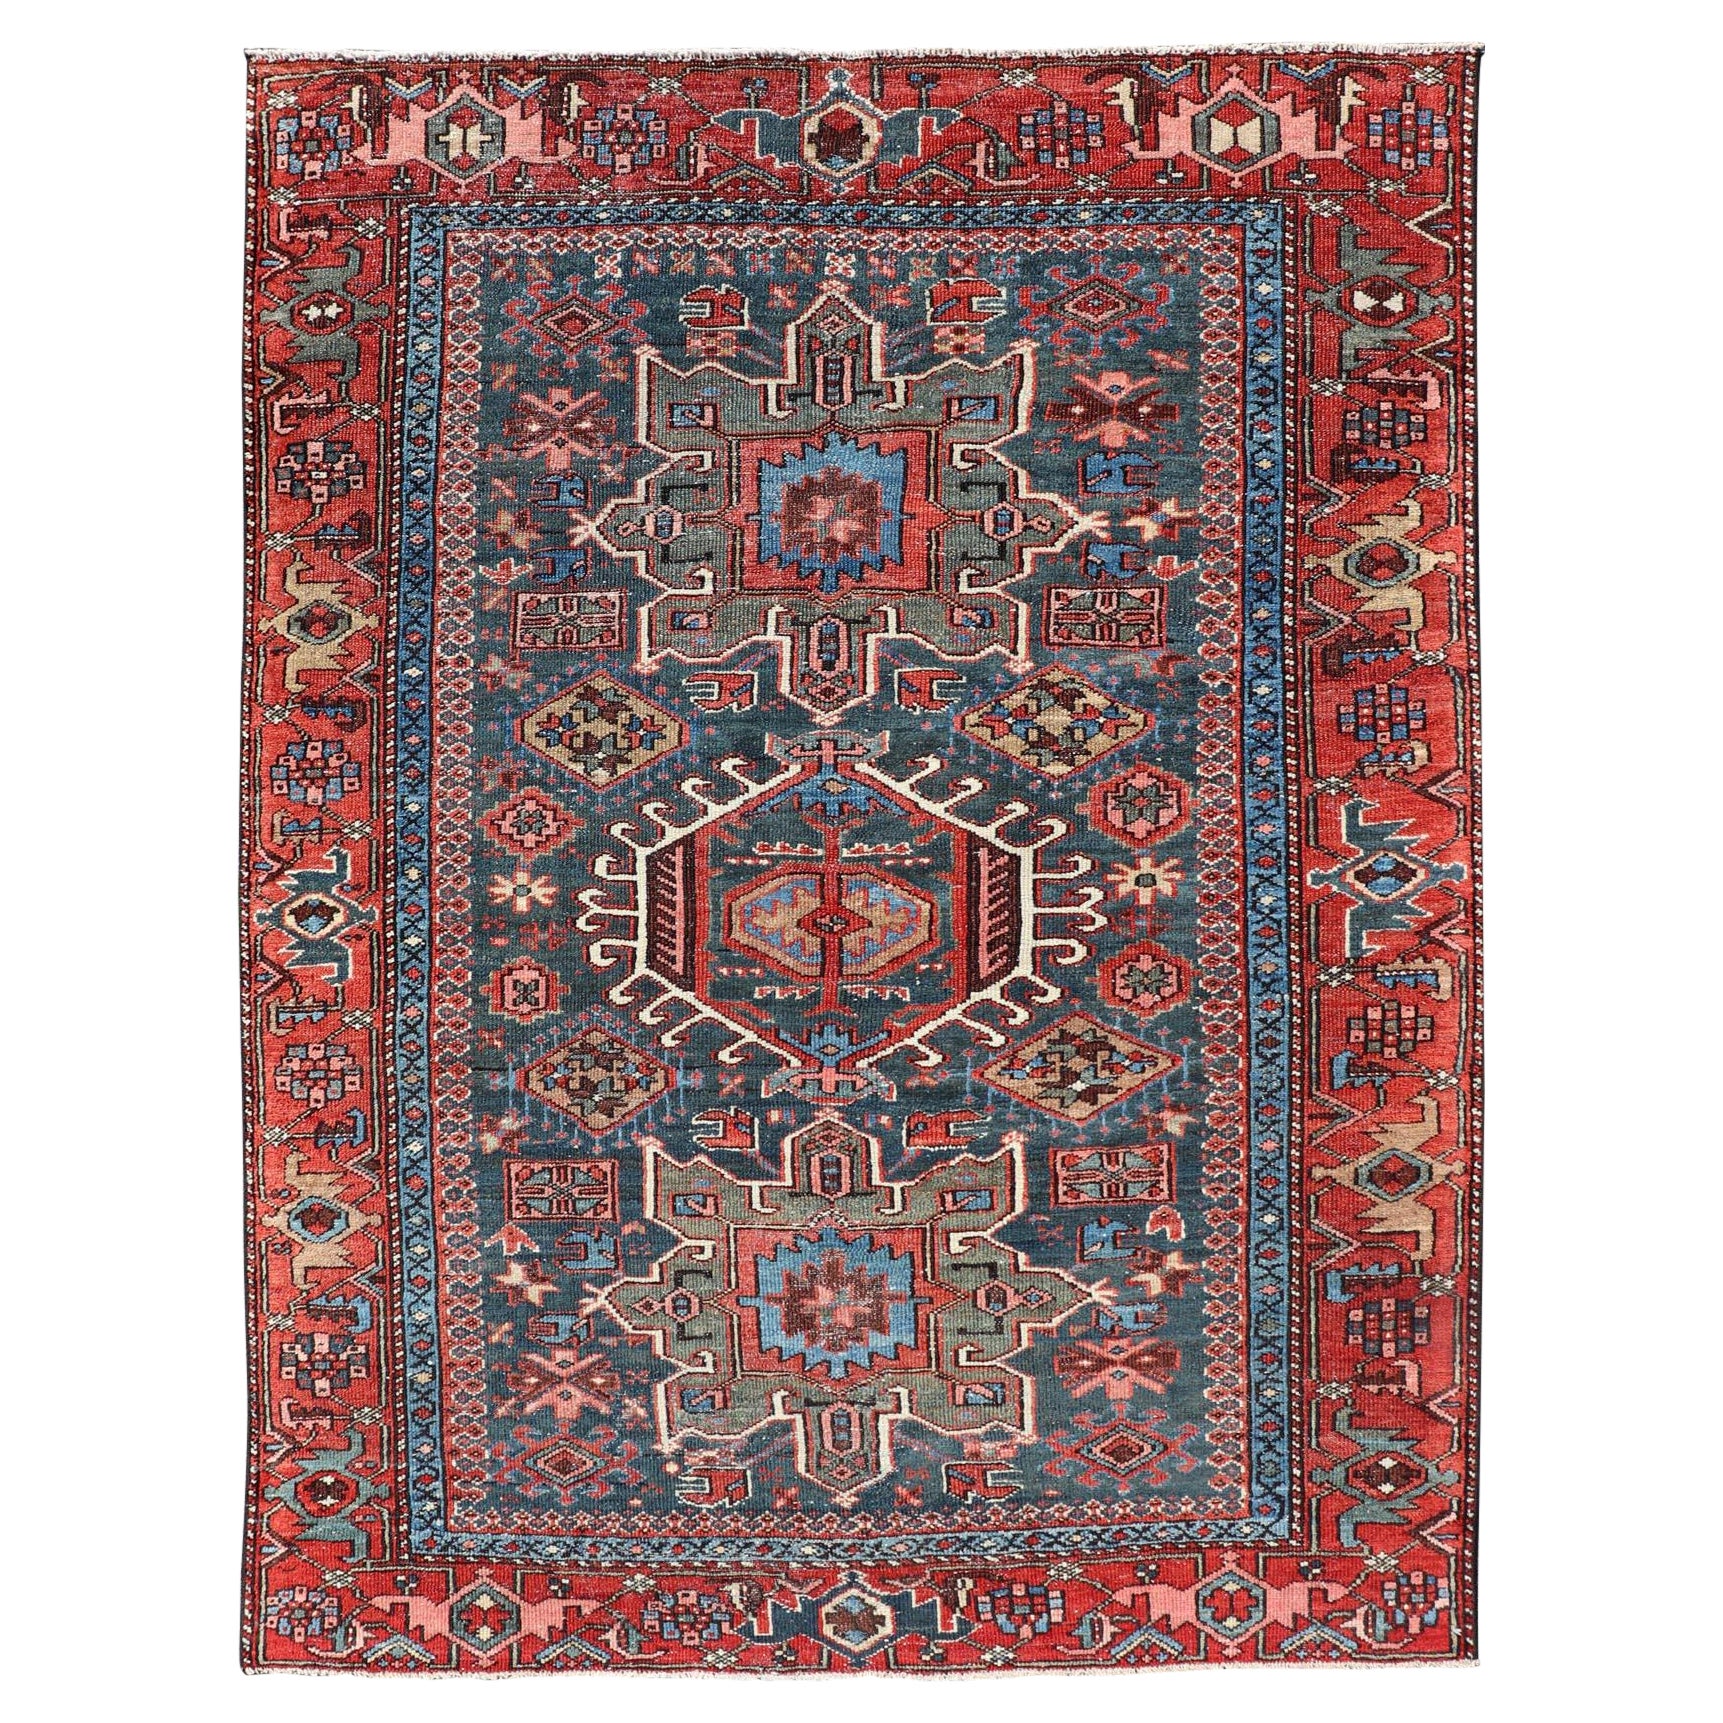 Antique Persian Karajeh Rug with Three Geometric Medallions in Red & Blue